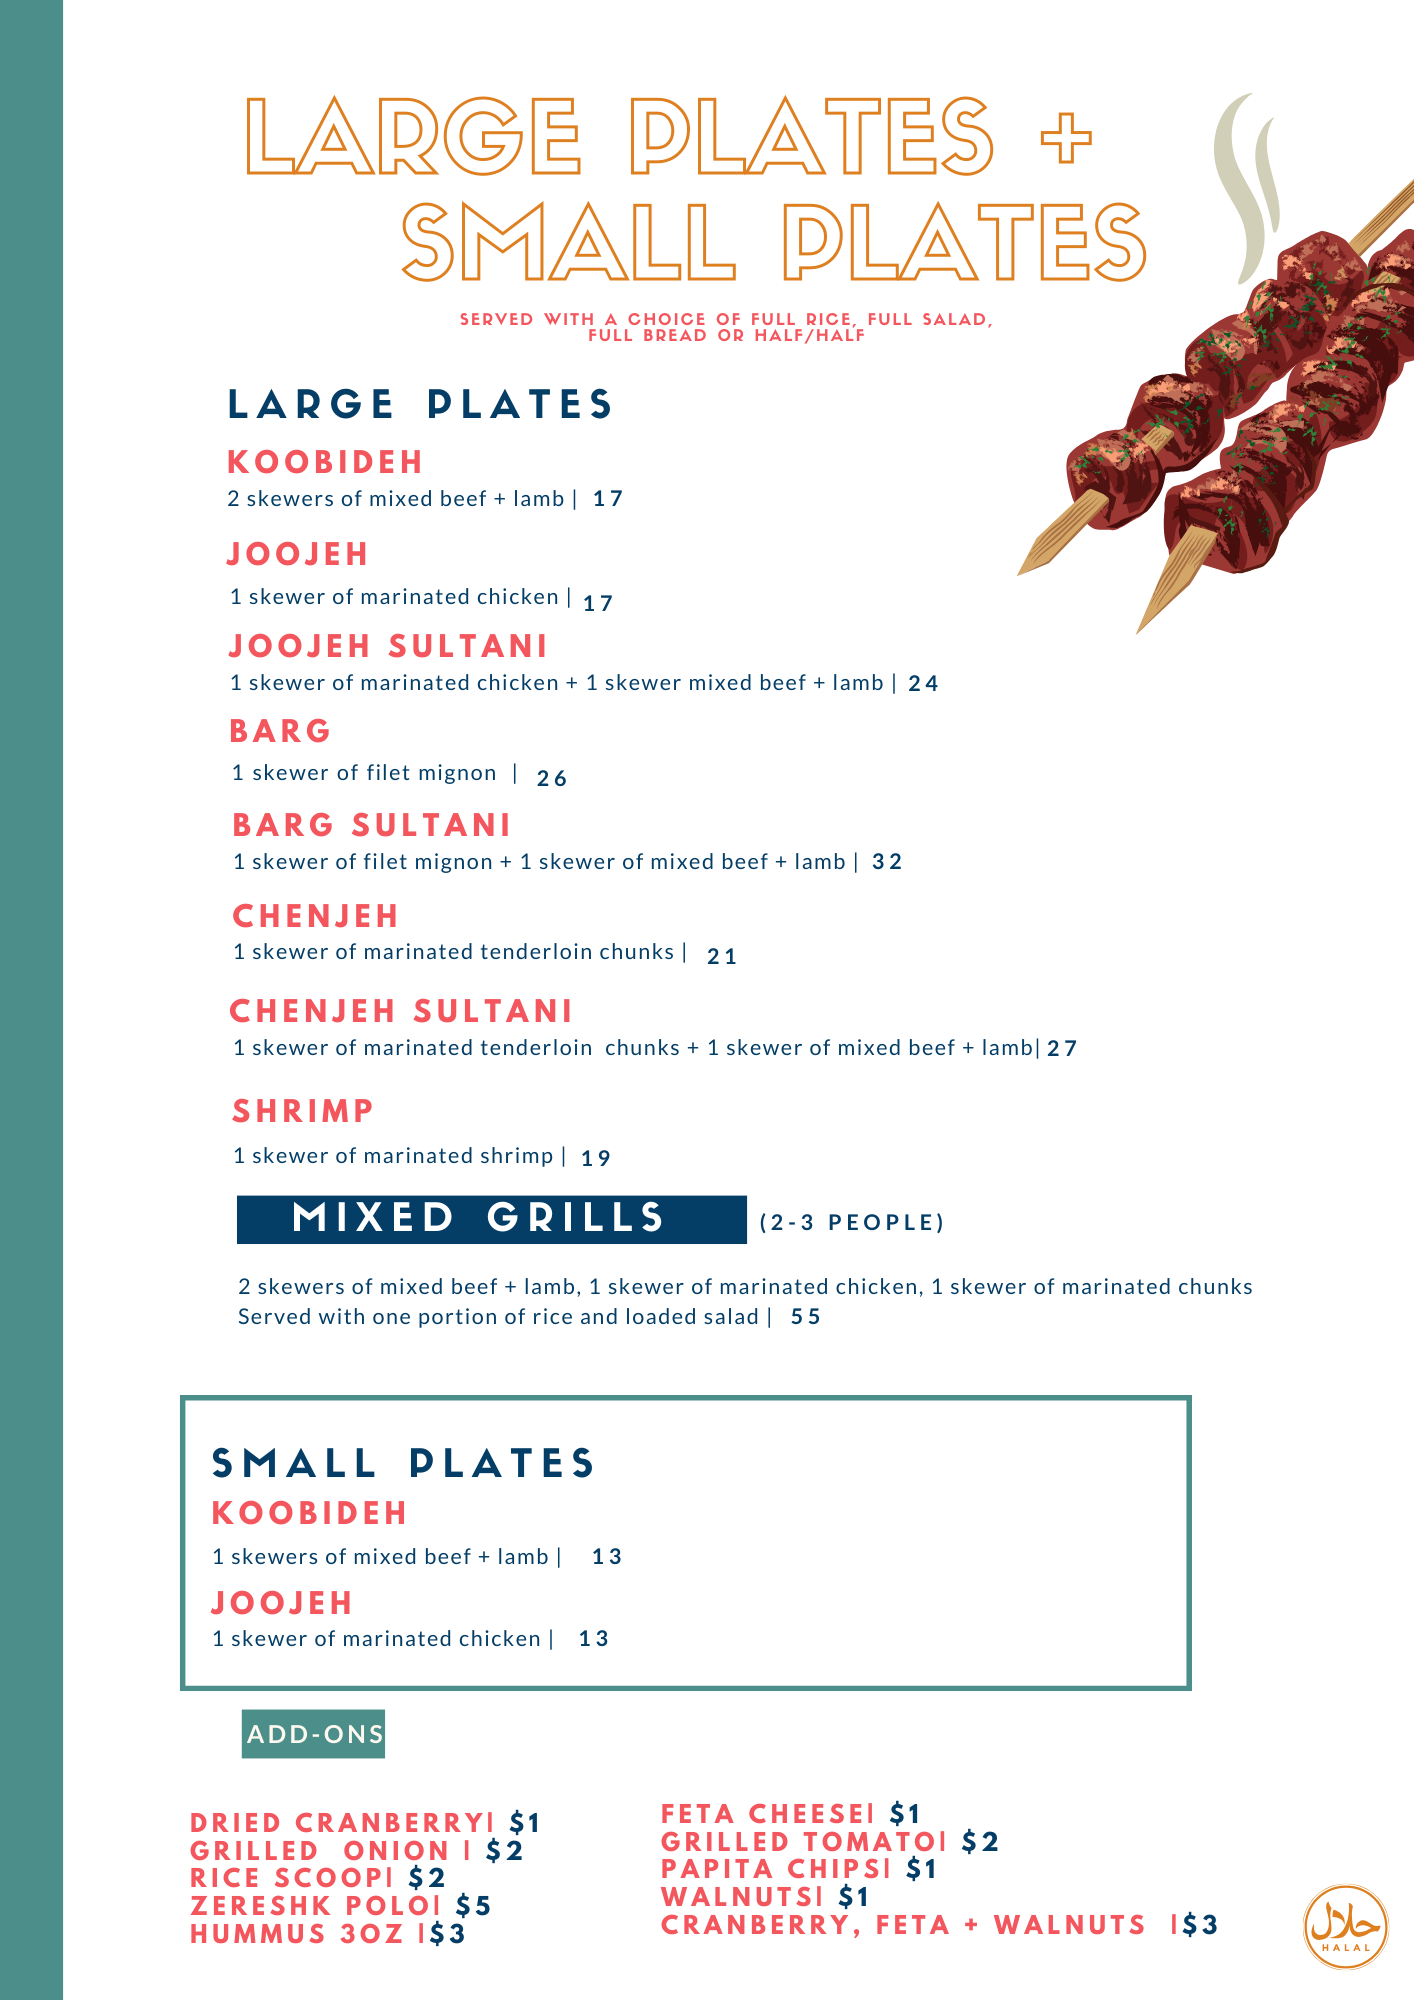 A menu for a restaurant shows large plates and small plates.